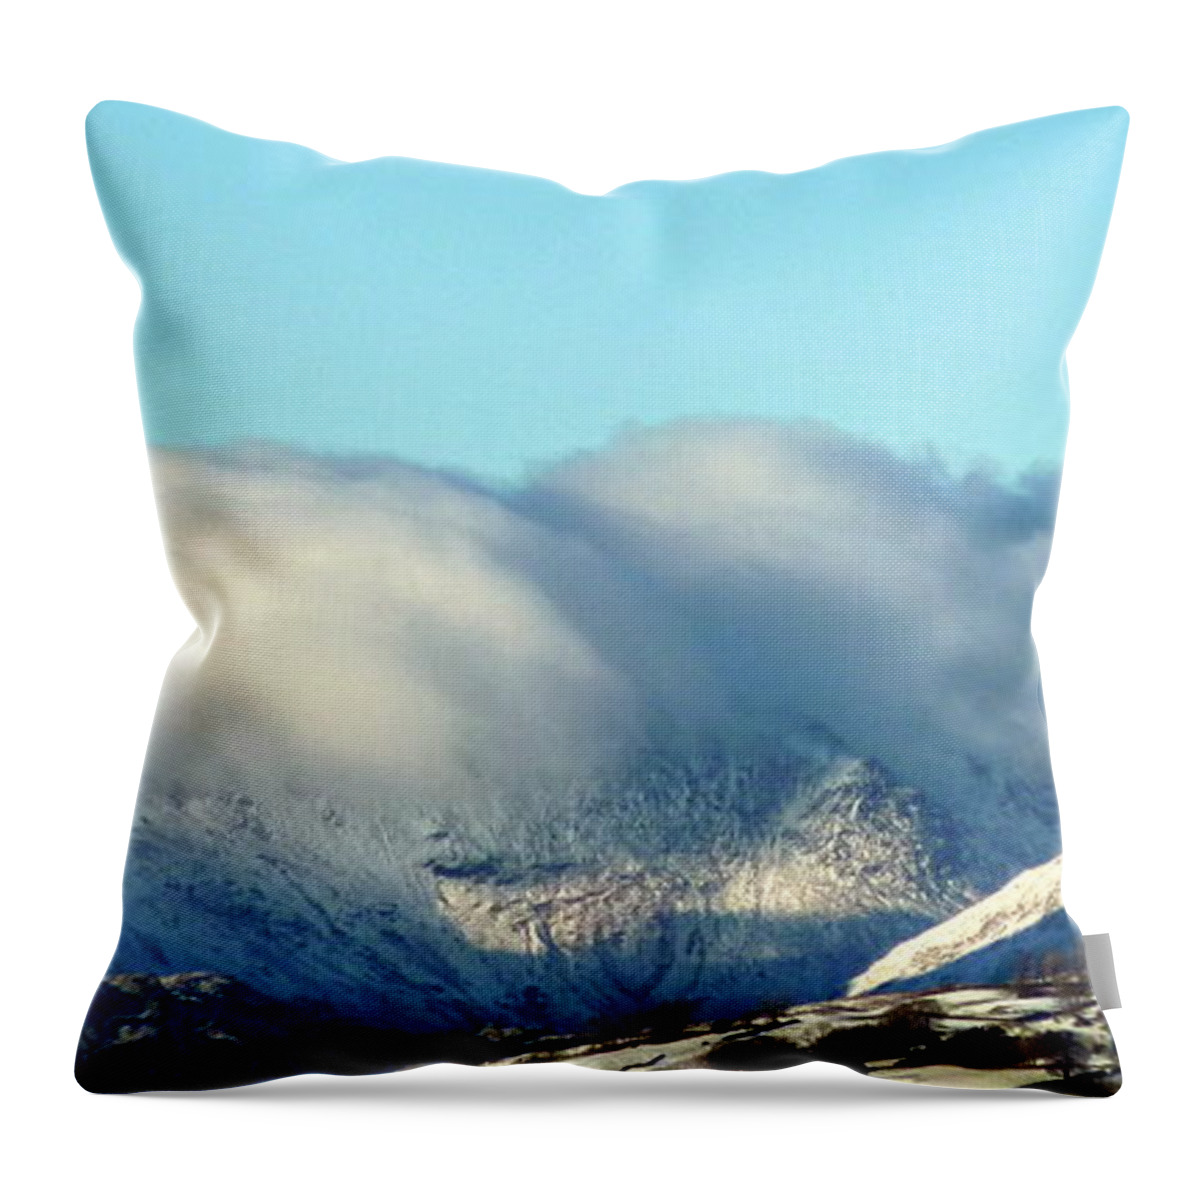 Clouds Throw Pillow featuring the photograph Cloudy mountains by Lukasz Ryszka